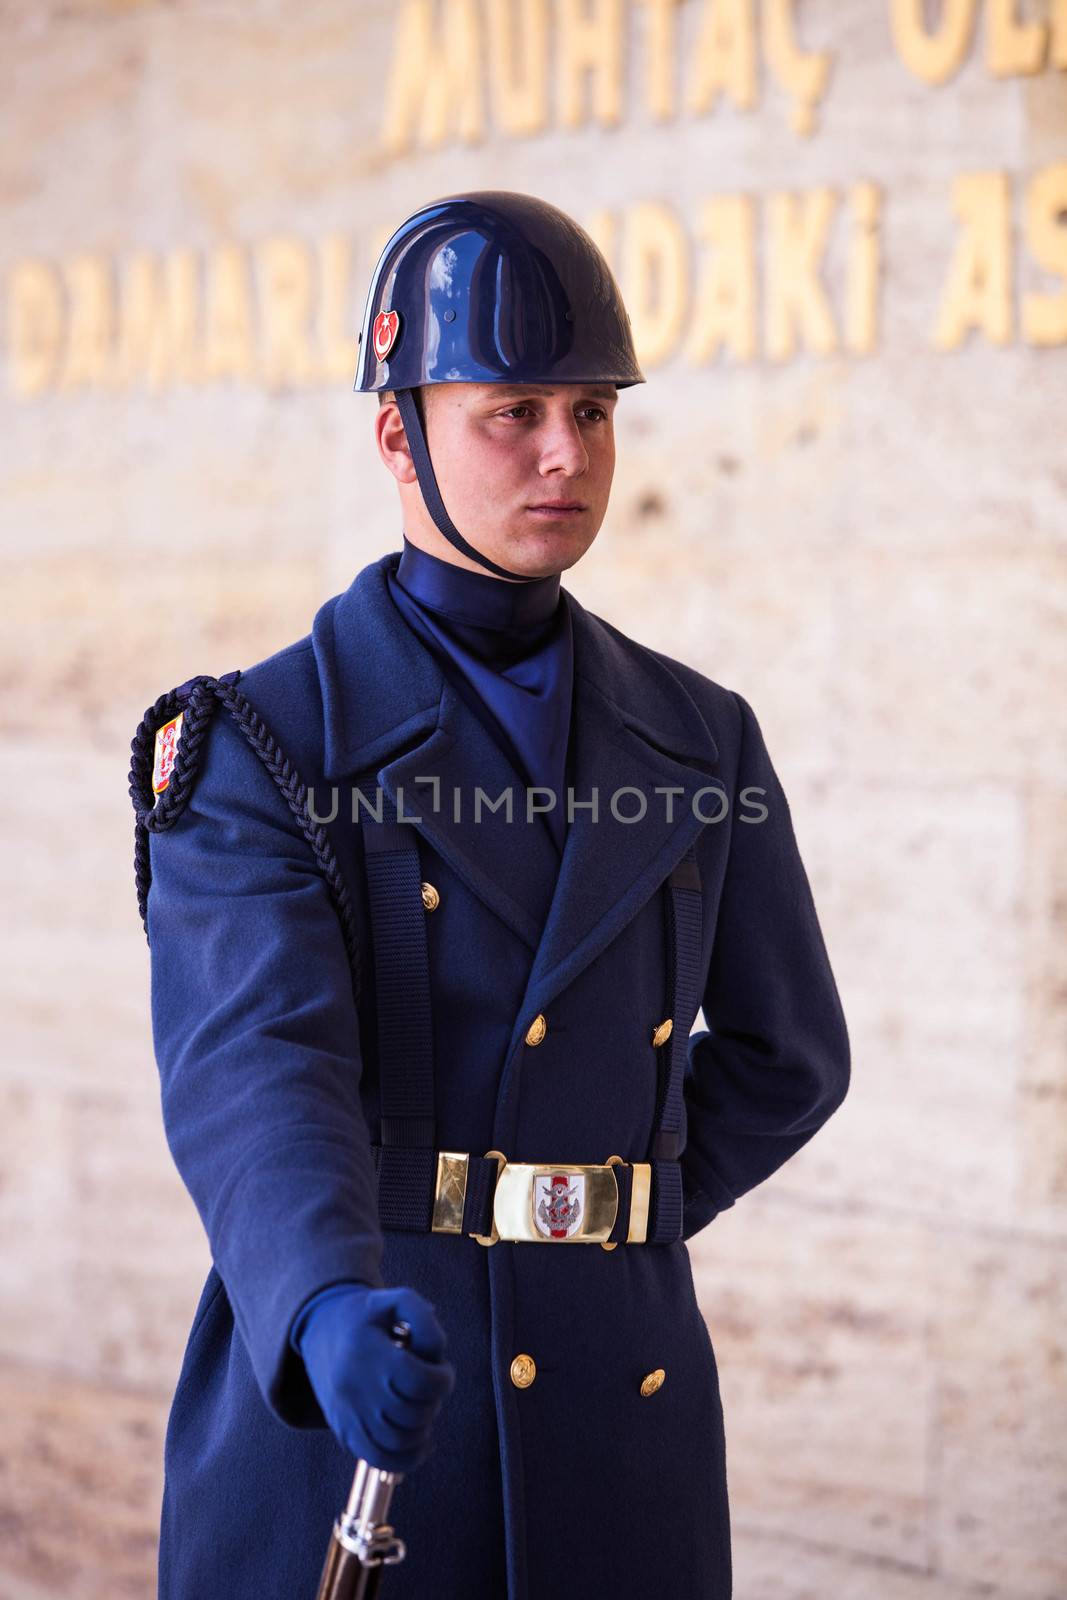 ANKARA, TURKEY ��� APRIL 15: Turkish guard at Mausoleum of Mustafa Kemal Atat��rk, the leader of the Turkish War of Independence on April 15, 2012 in Ankara, Turkey prior to Anzac Day.  Turkish people thank and remember allies from Australia and New Zealand who fought at the battle of Galipoli in the Ottoman Empire during World War I.  Turkish guards silently stand watch at Ataturk's tomb.